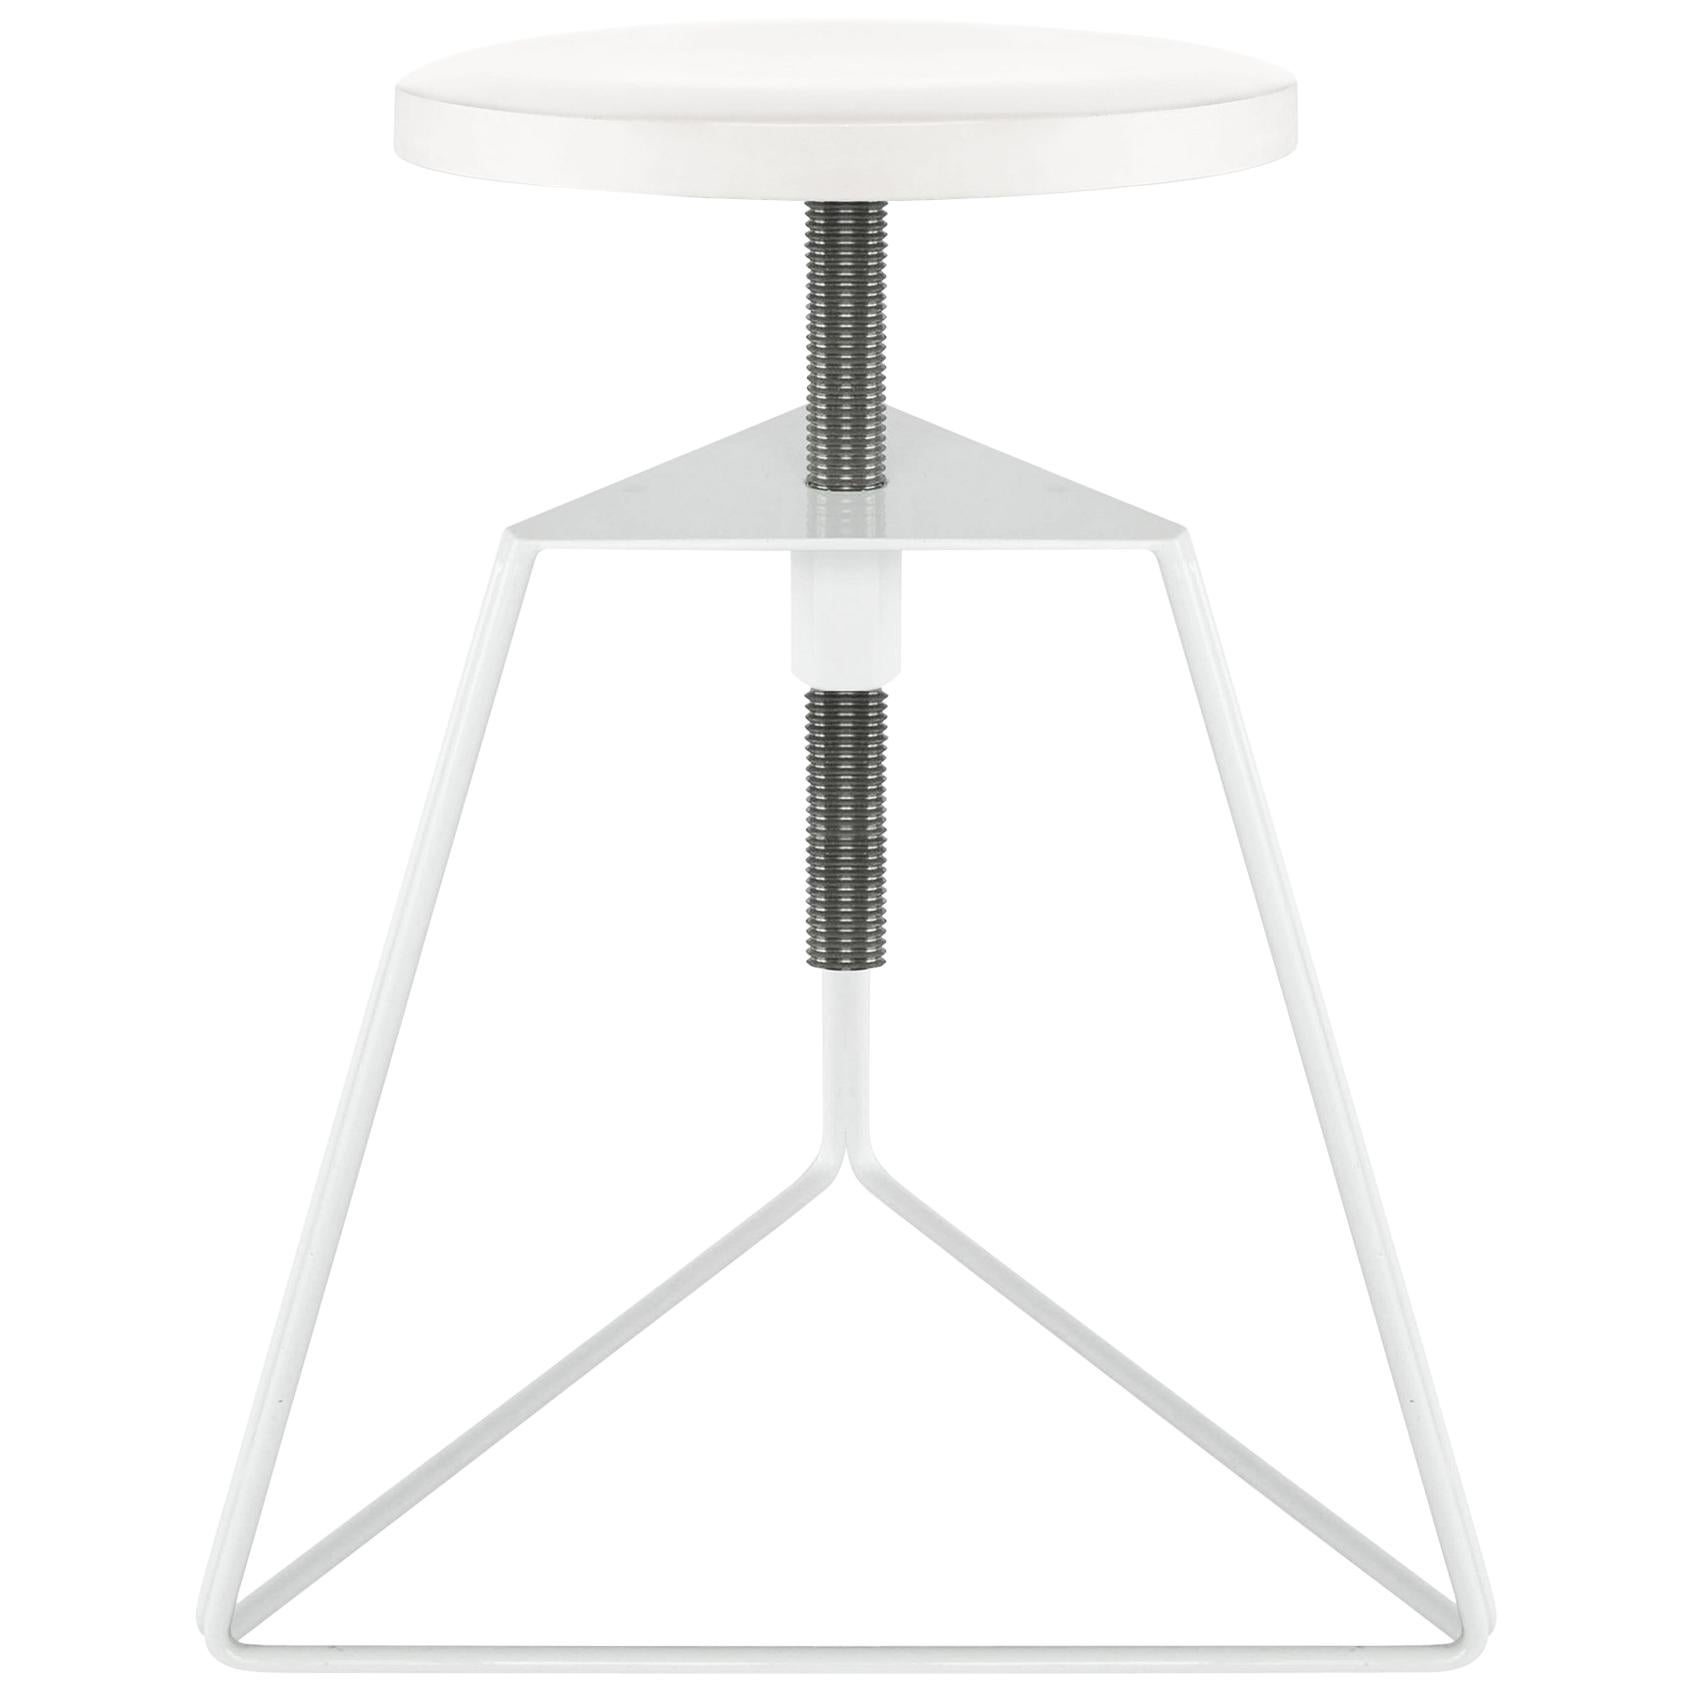 Camp Stool, White and White Marble, Adjustable Height Low Stool, 18 Variations For Sale